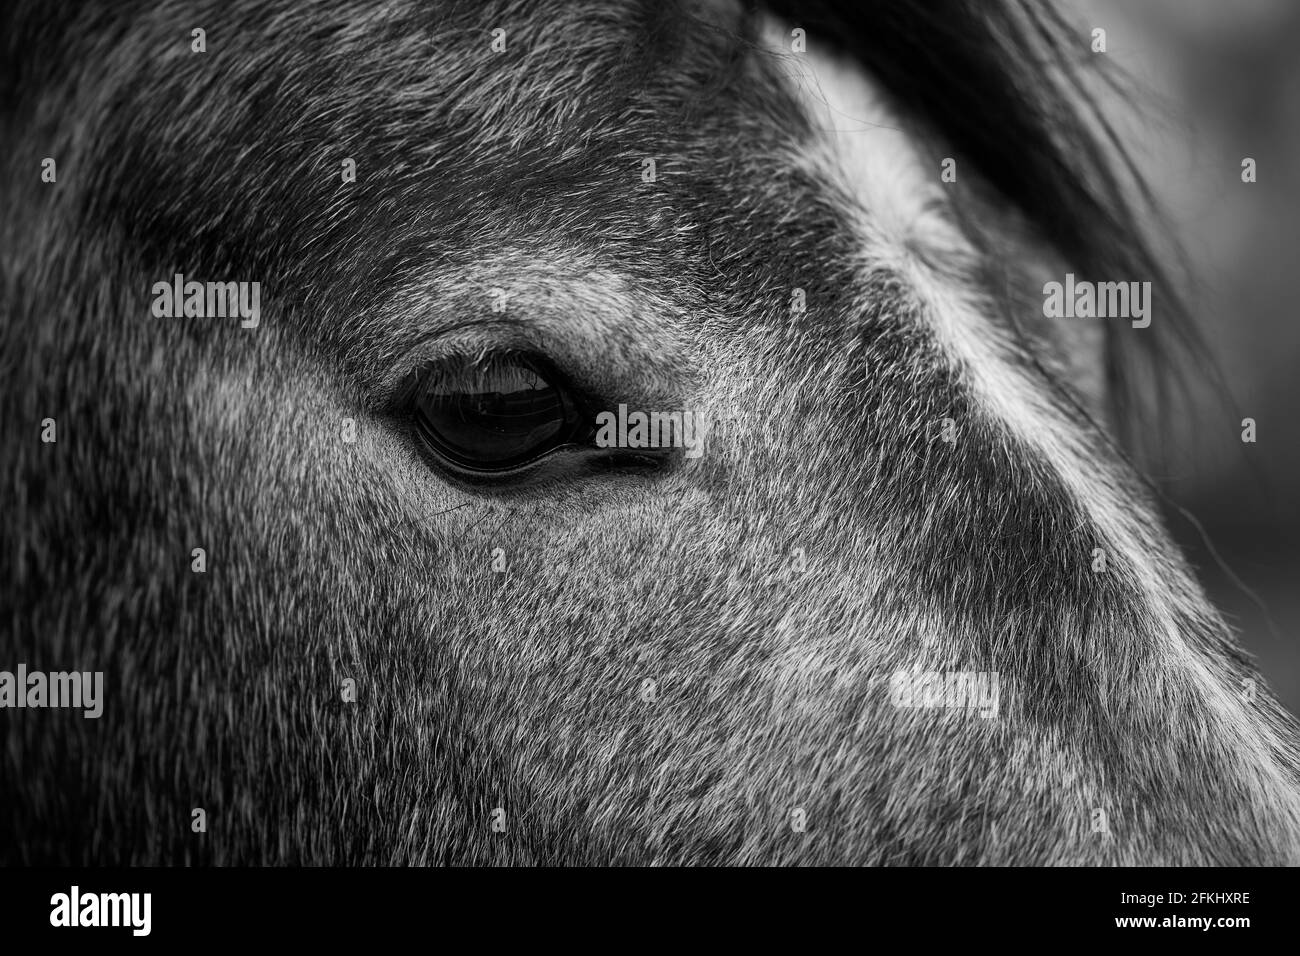 Side view of a horse head with beautiful eye, black and white. Stock Photo